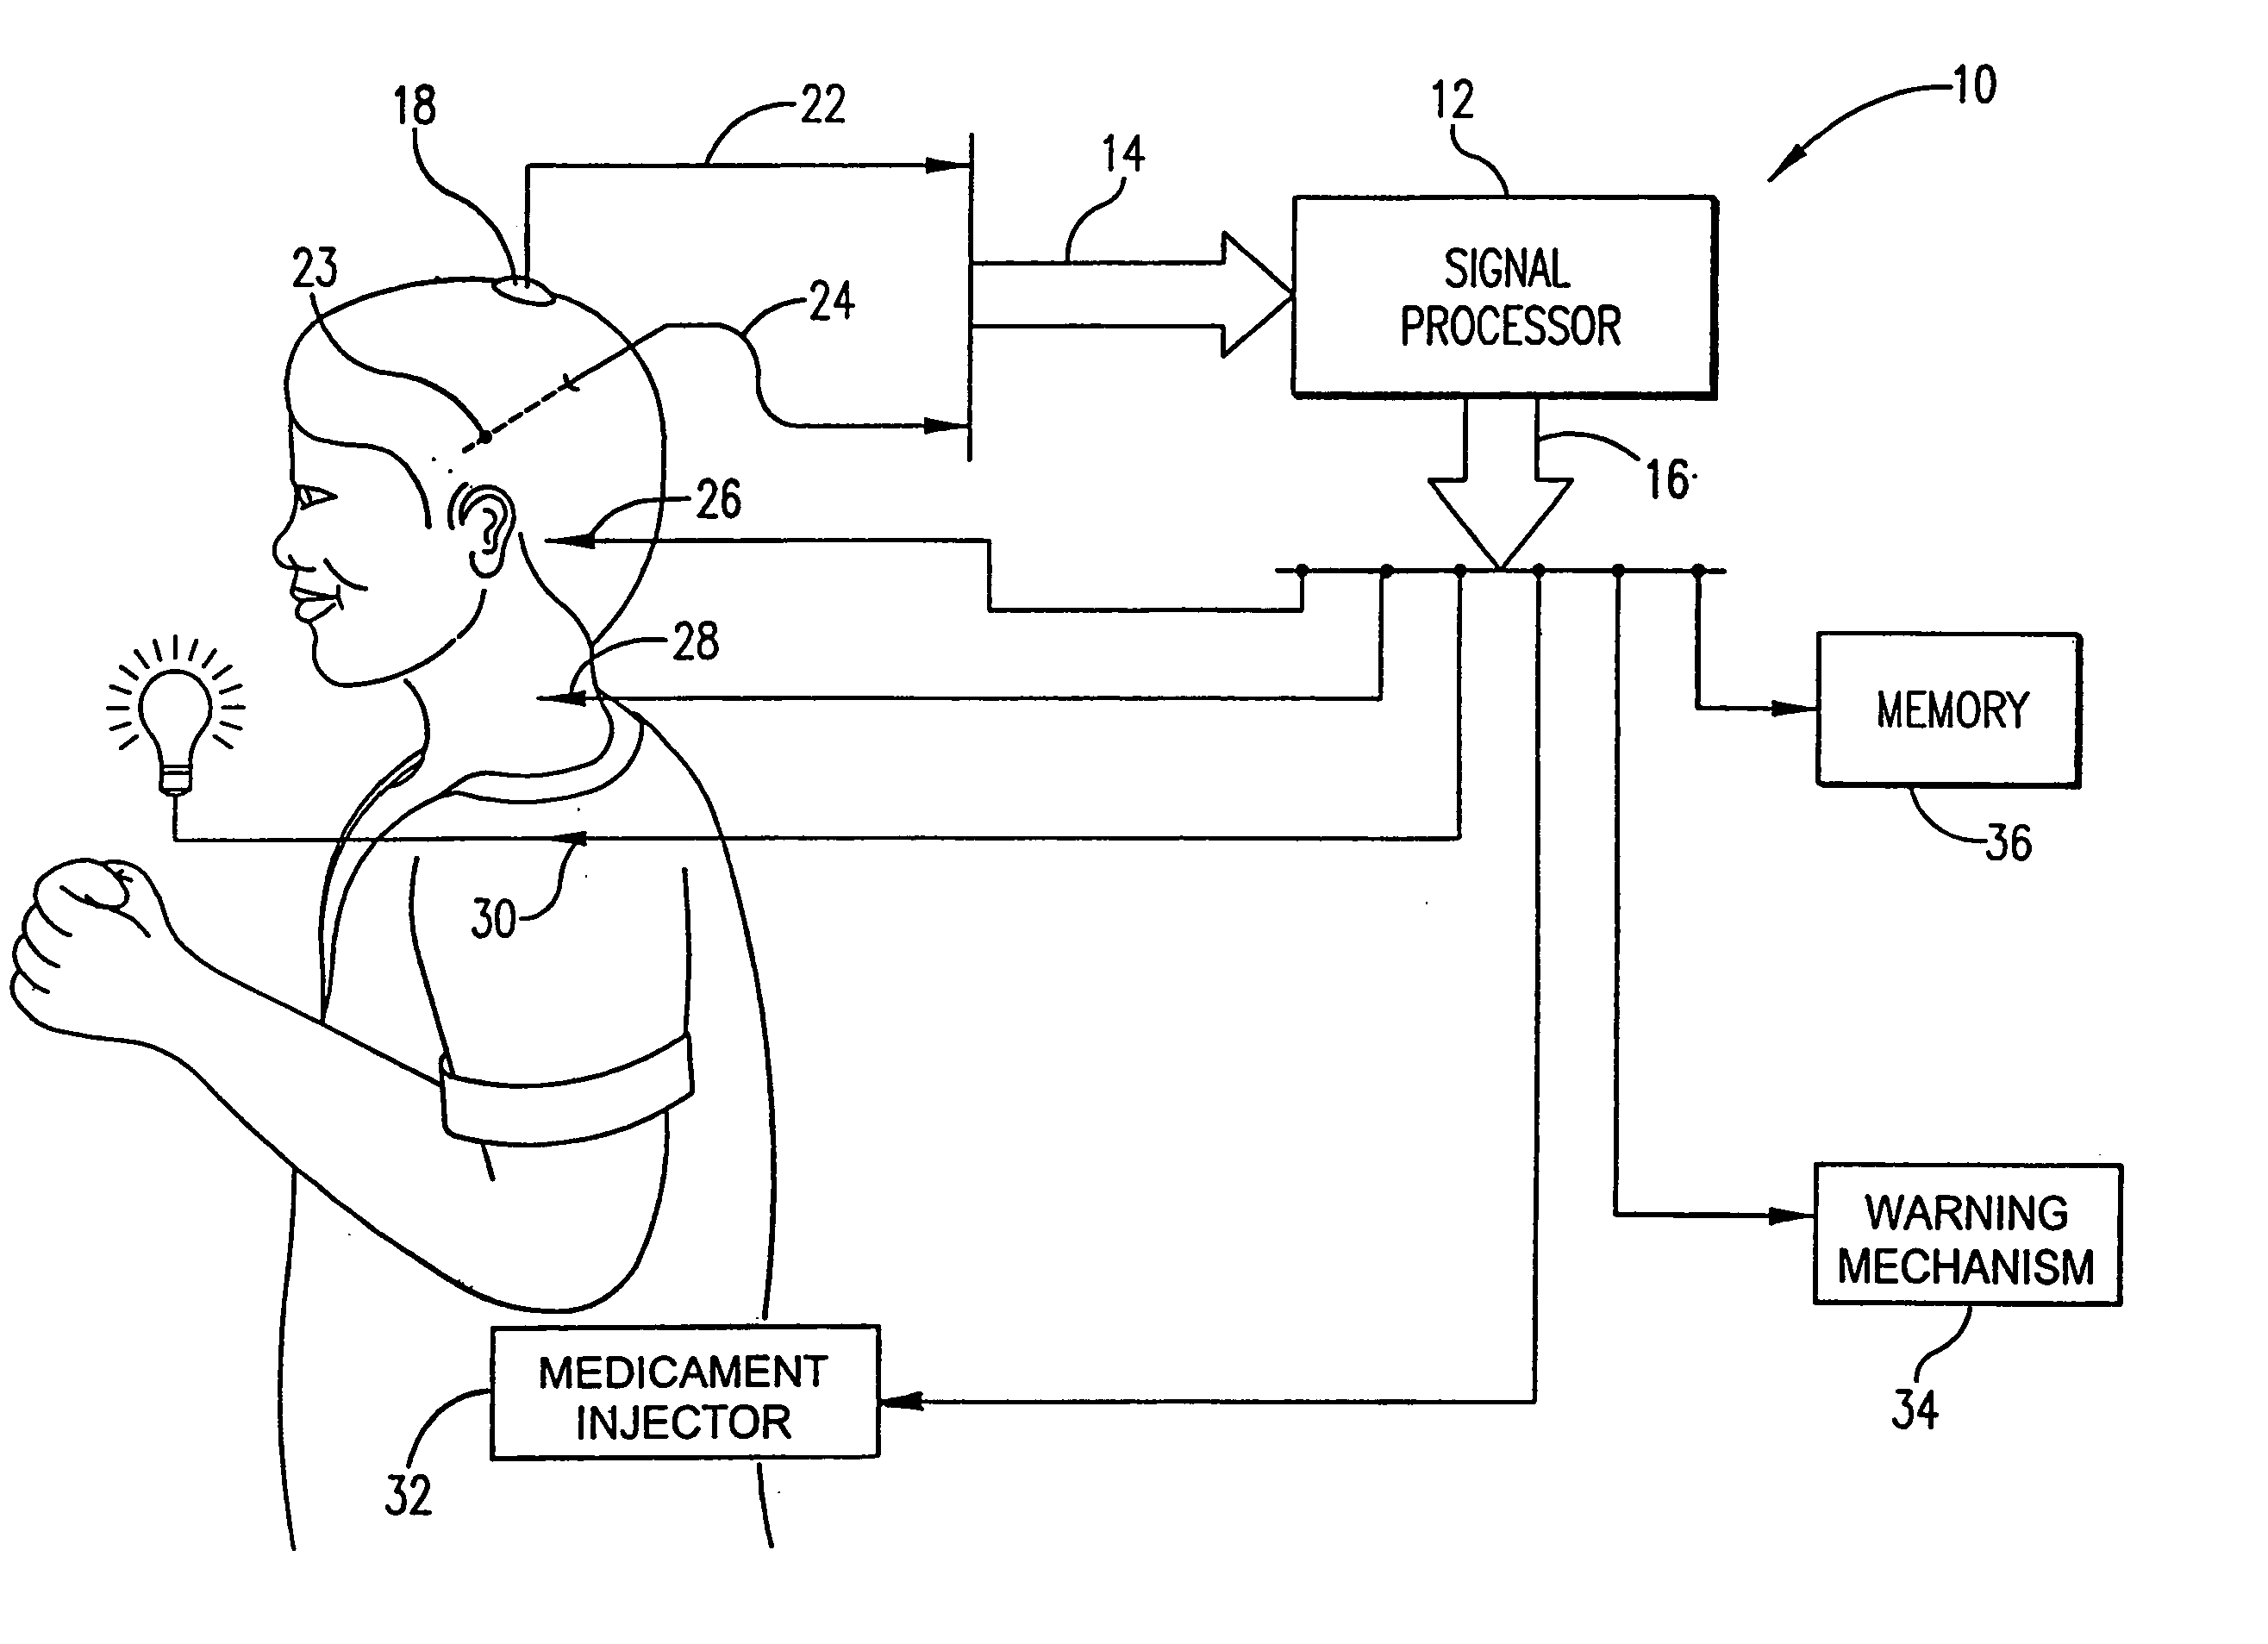 System for the prediction, rapid detection, warning, prevention, or control of changes in activity states in the brain of a subject